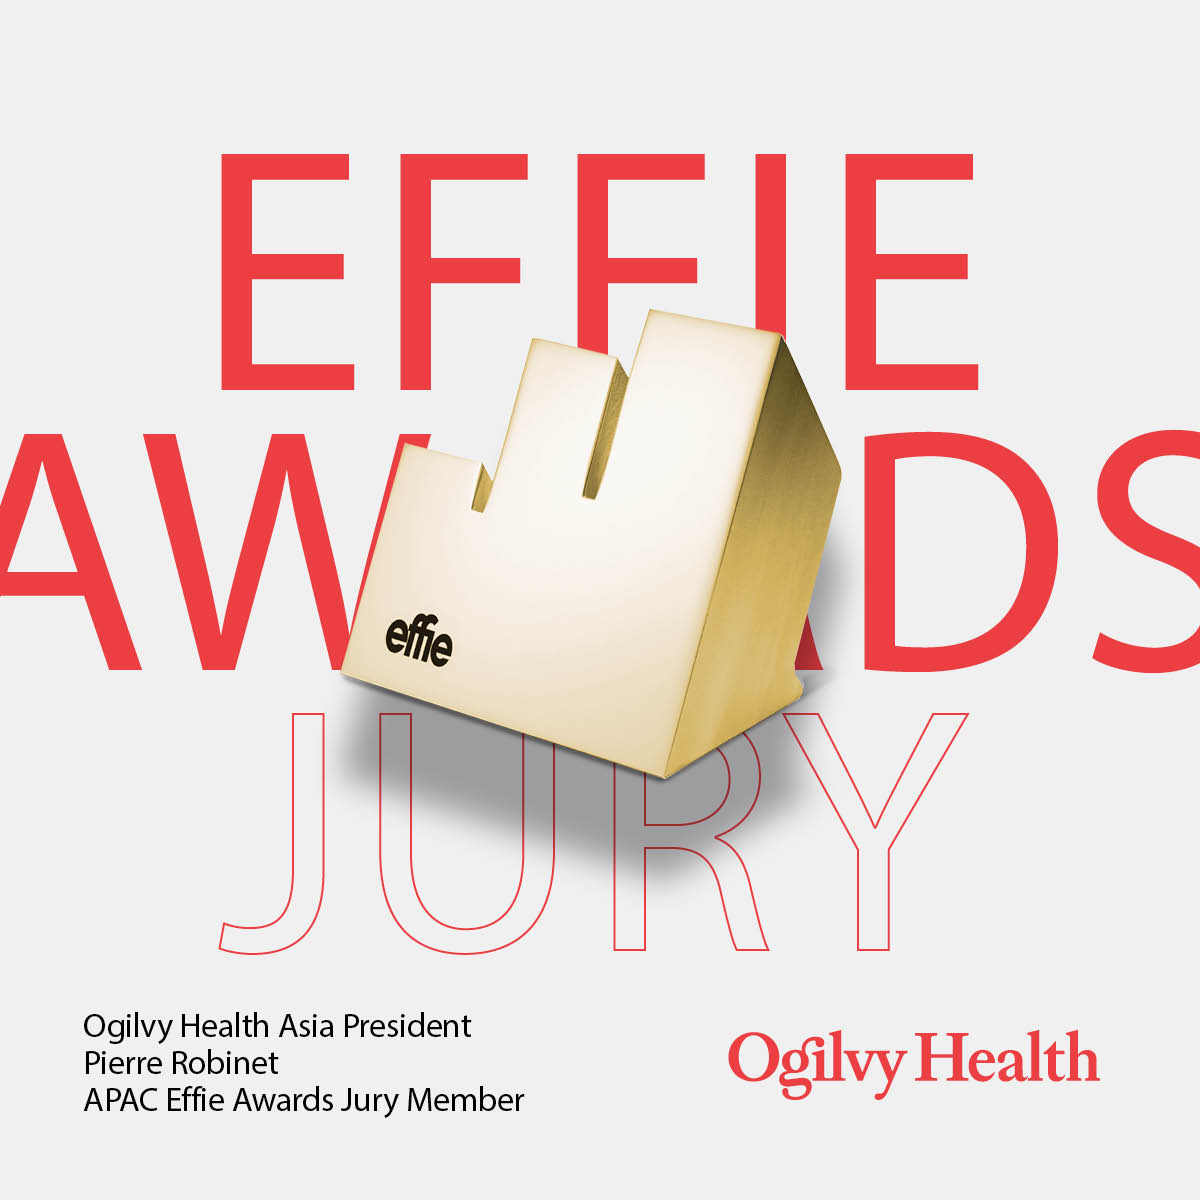 We’re delighted to share that Pierre Robinet, Ogilvy Health’s Asia President, was selected as a 2024 APAC Effie Awards Jury Member! He joins industry leaders from across APAC to set the gold standard of marketing effectiveness excellence. Full jury: bit.ly/3U5rruH